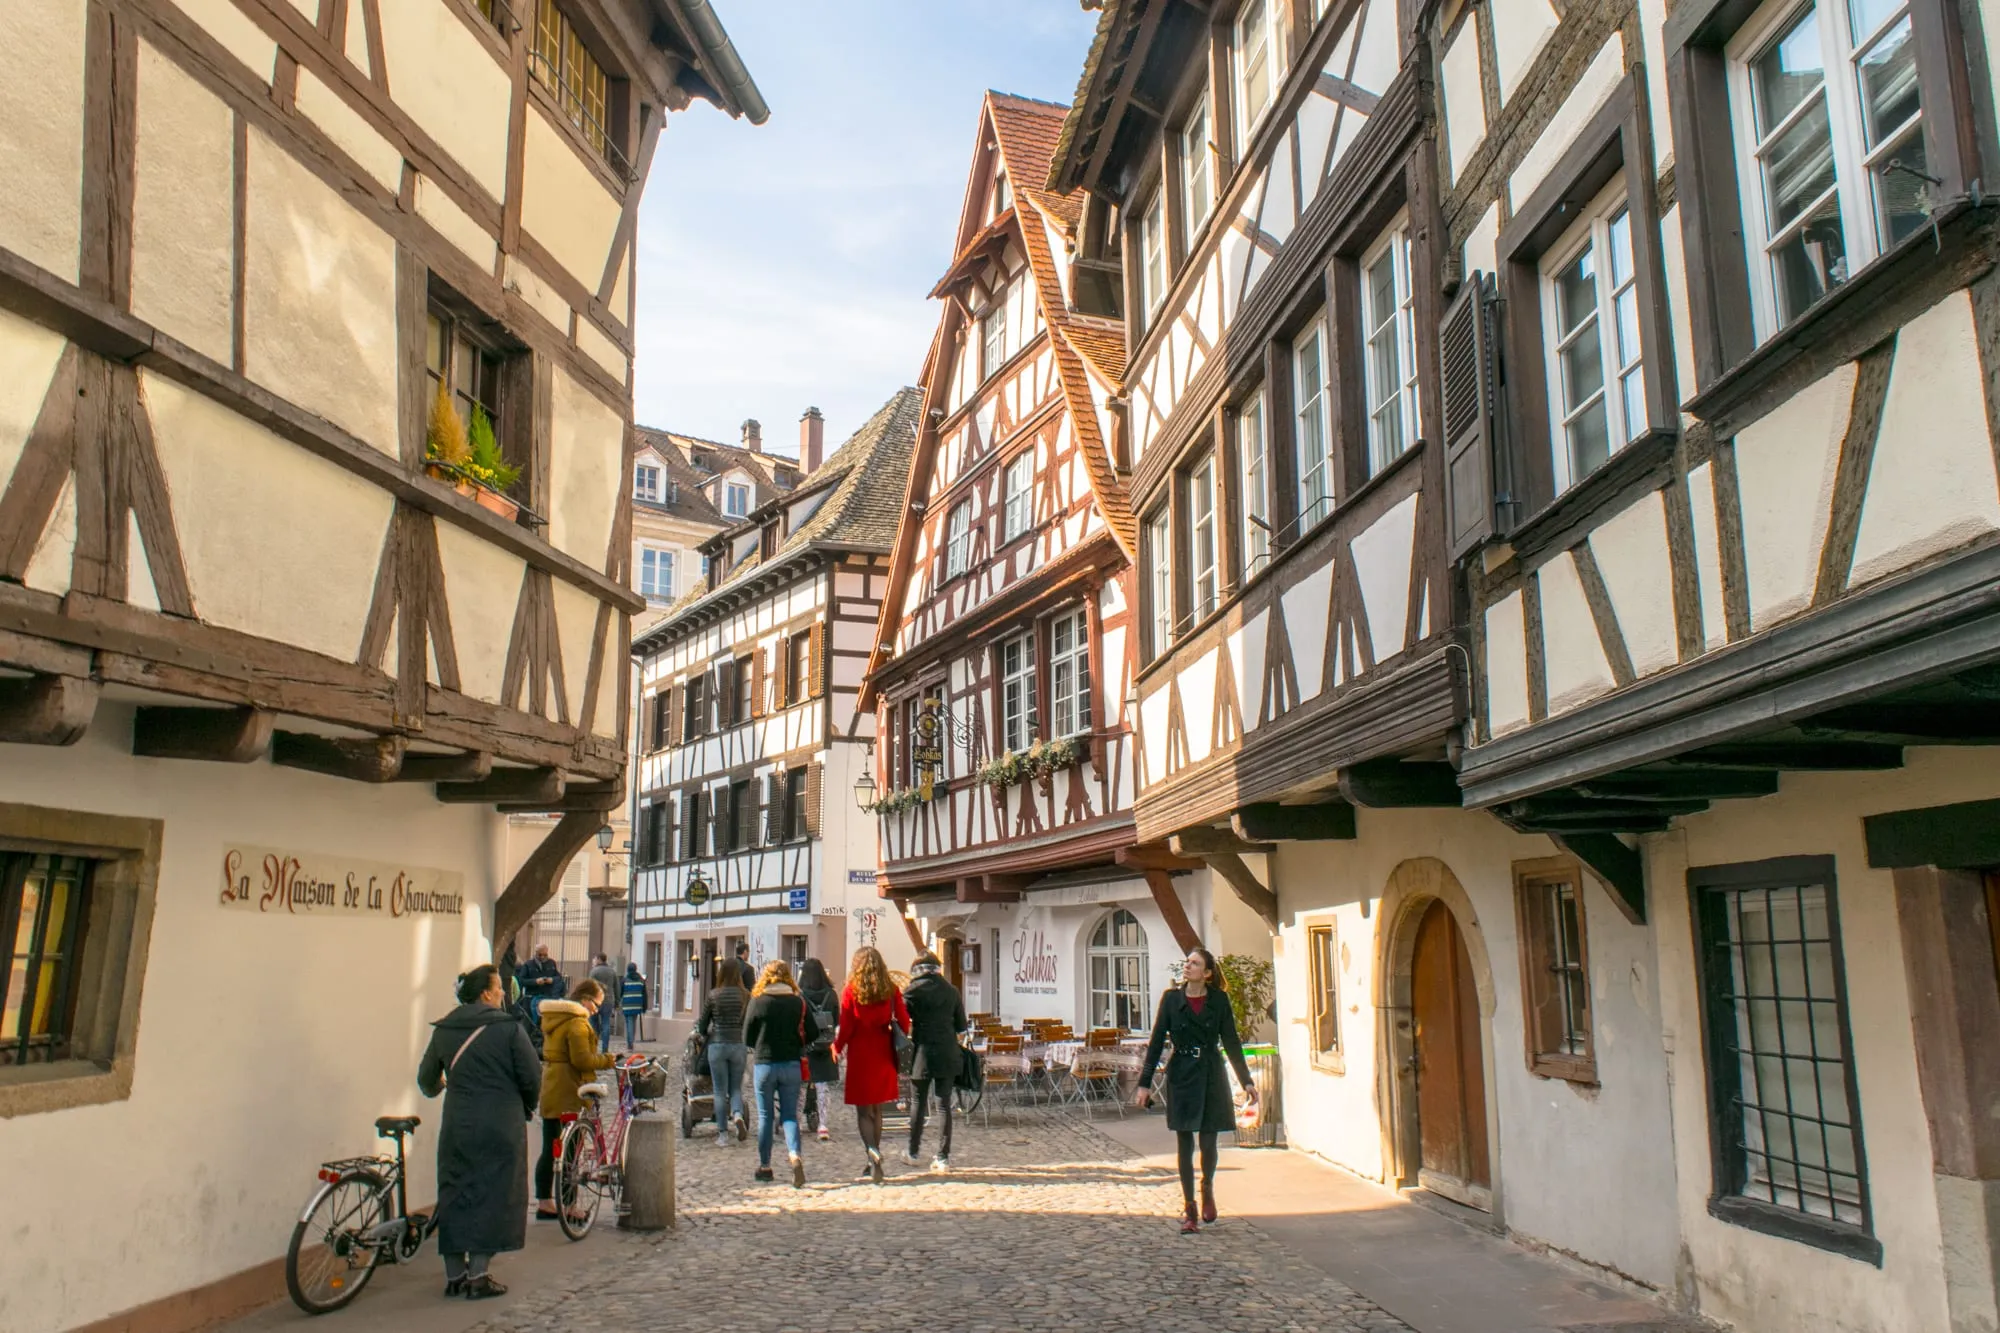 One Day in Strasbourg Itinerary: Streets of La Petite France